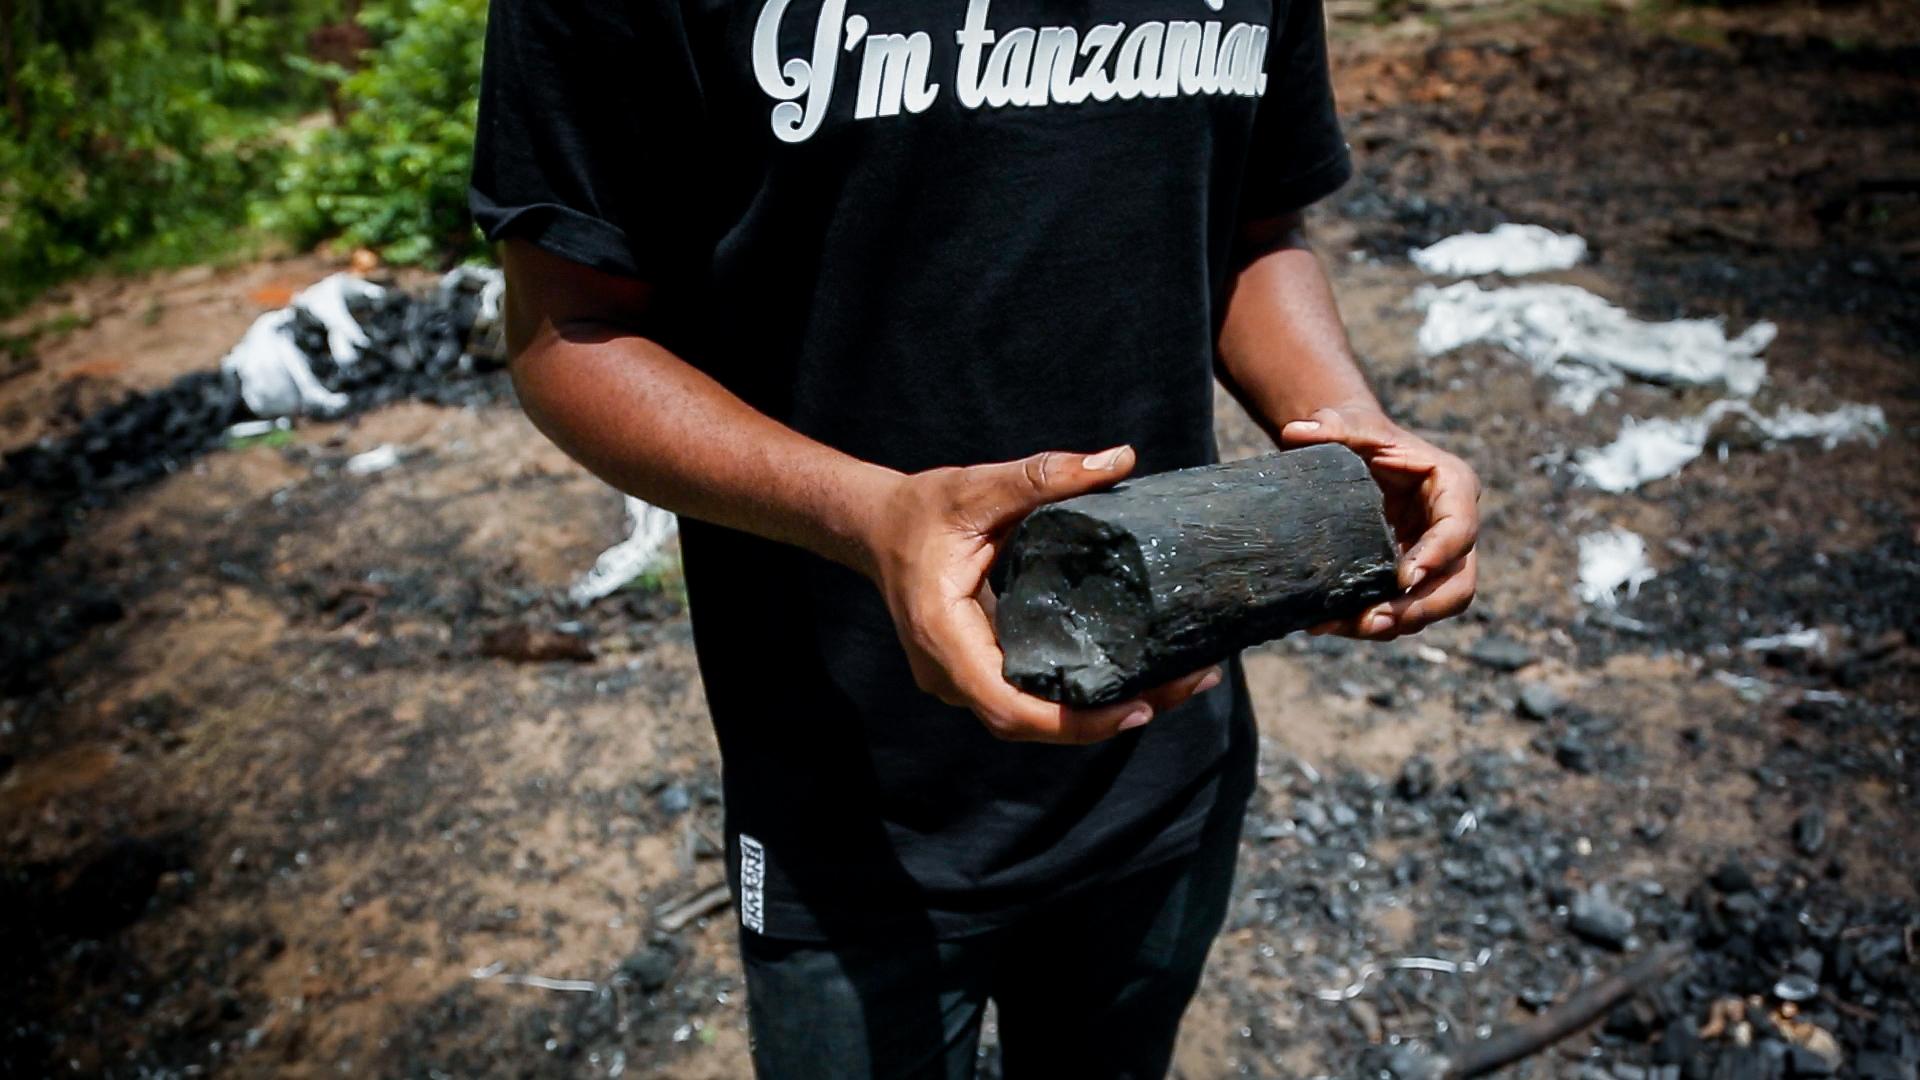 Ninety five percent of urban Tanzanians use charcoal for cooking fuel, and the trade supports more than a million jobs. But charcoal production is taking a massive toll on the country's forests. After a failed attempt to ban the trade the country is now t